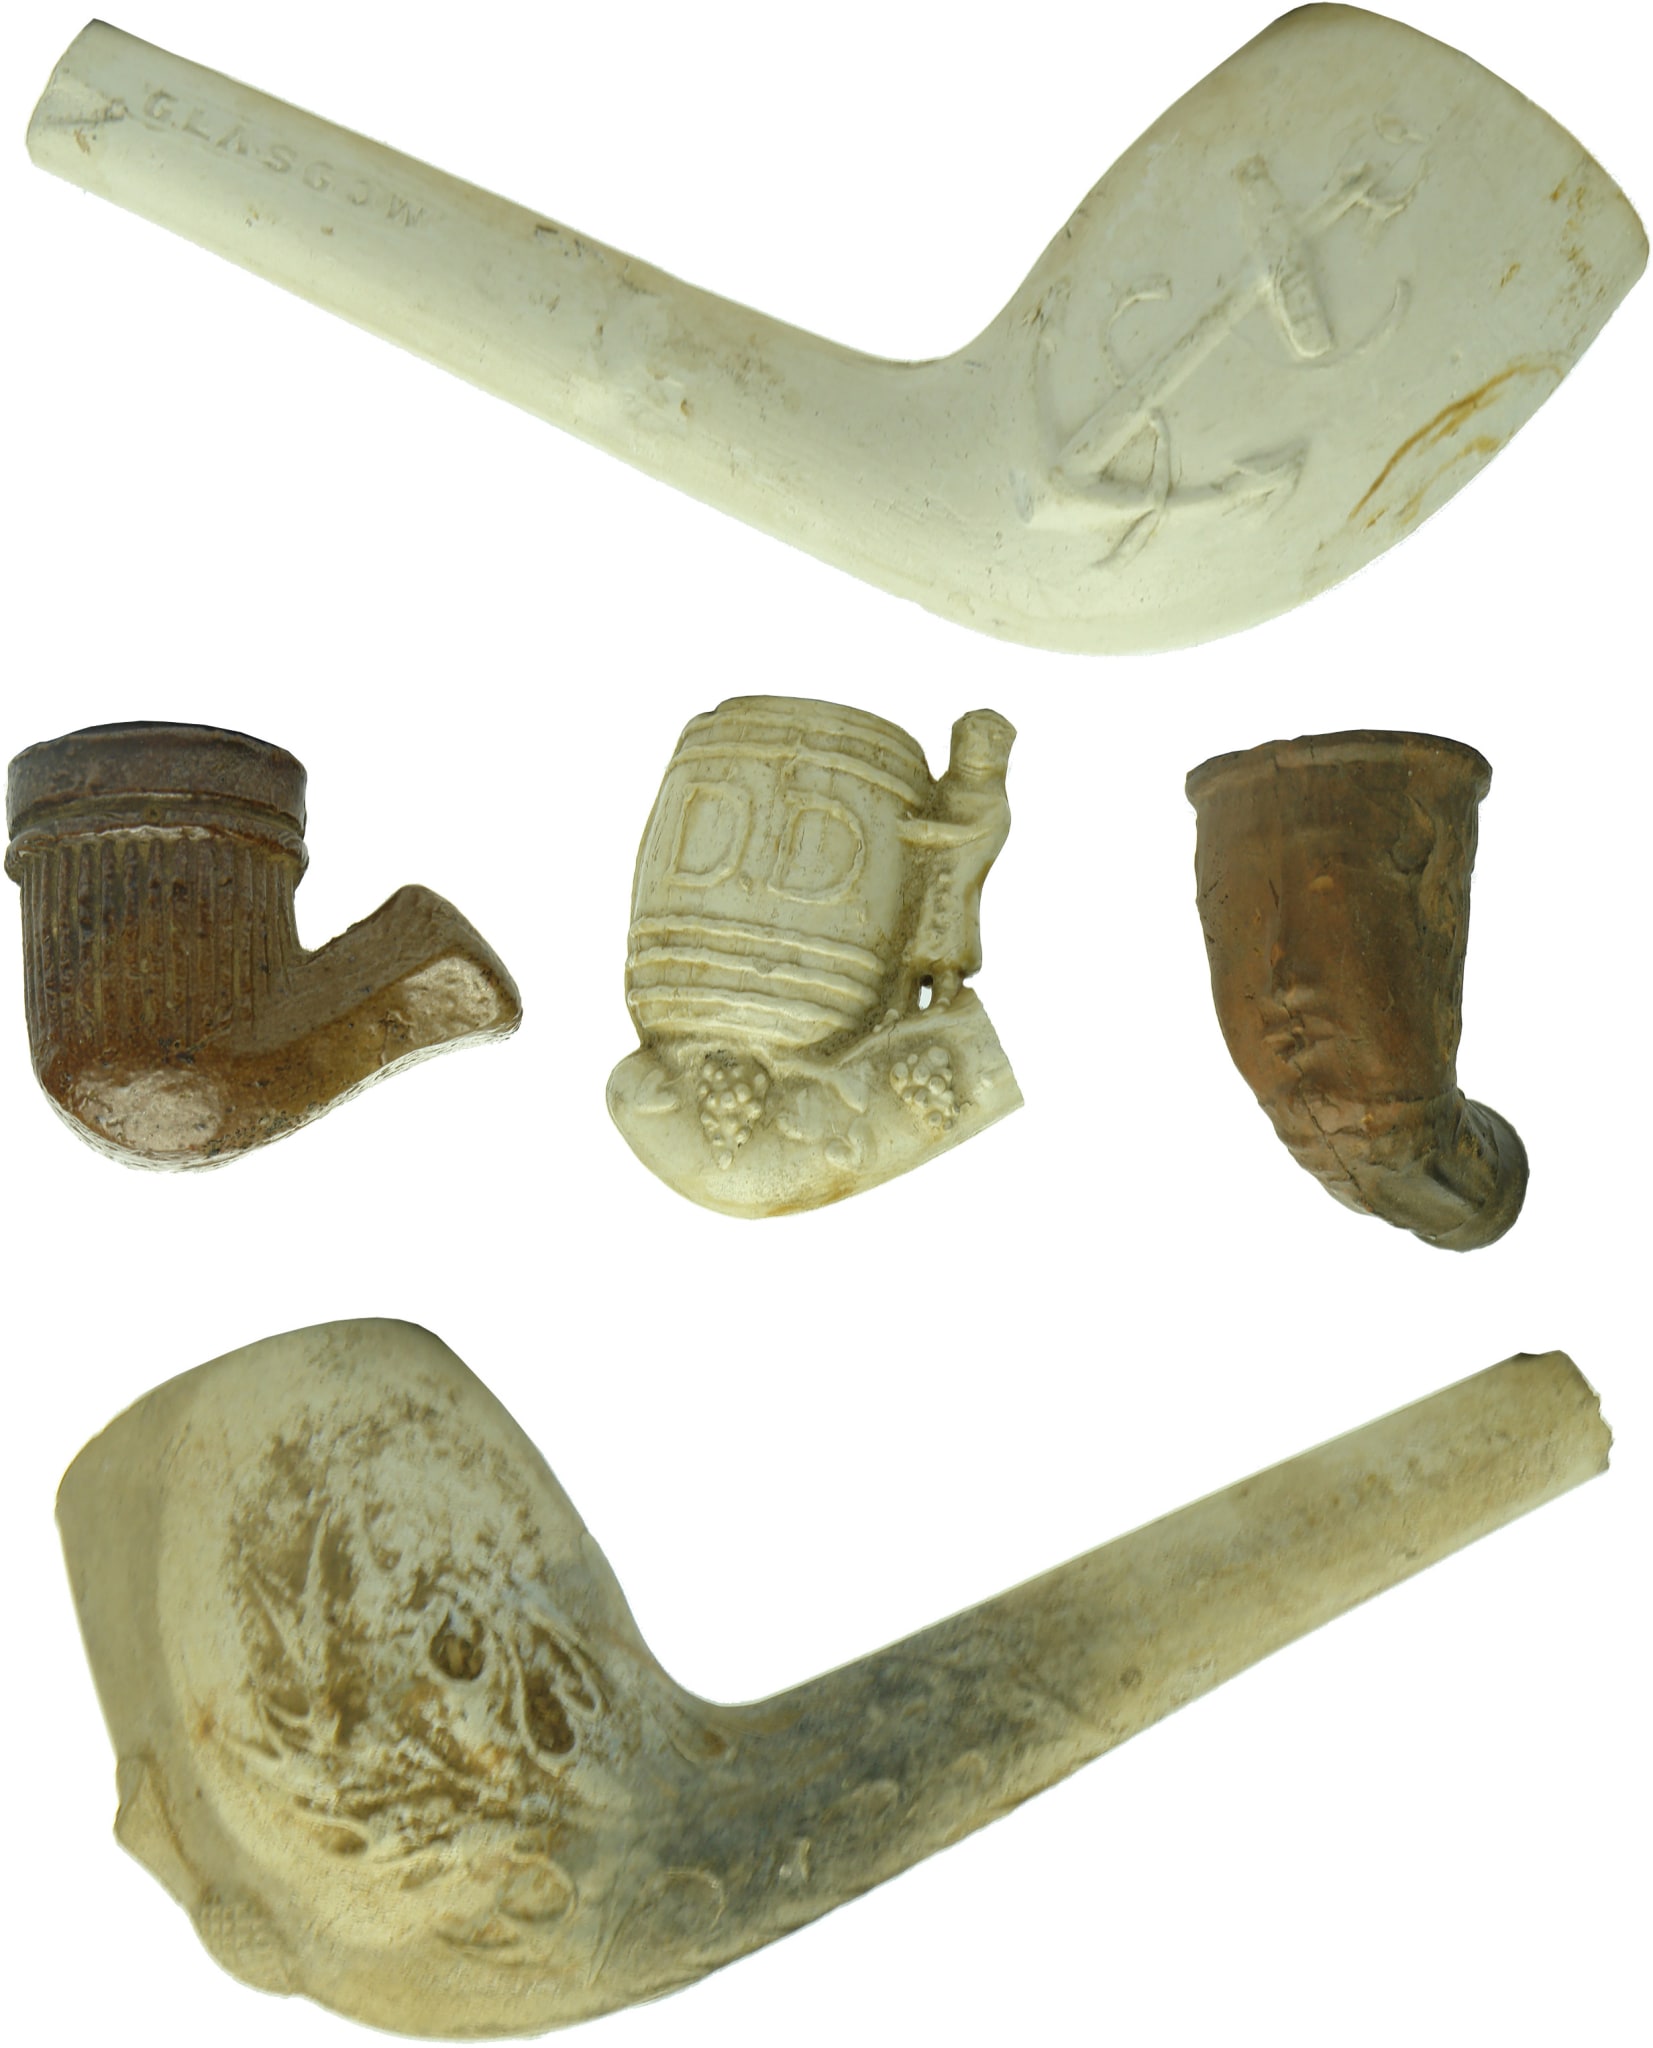 Old Antique Clay Pipes